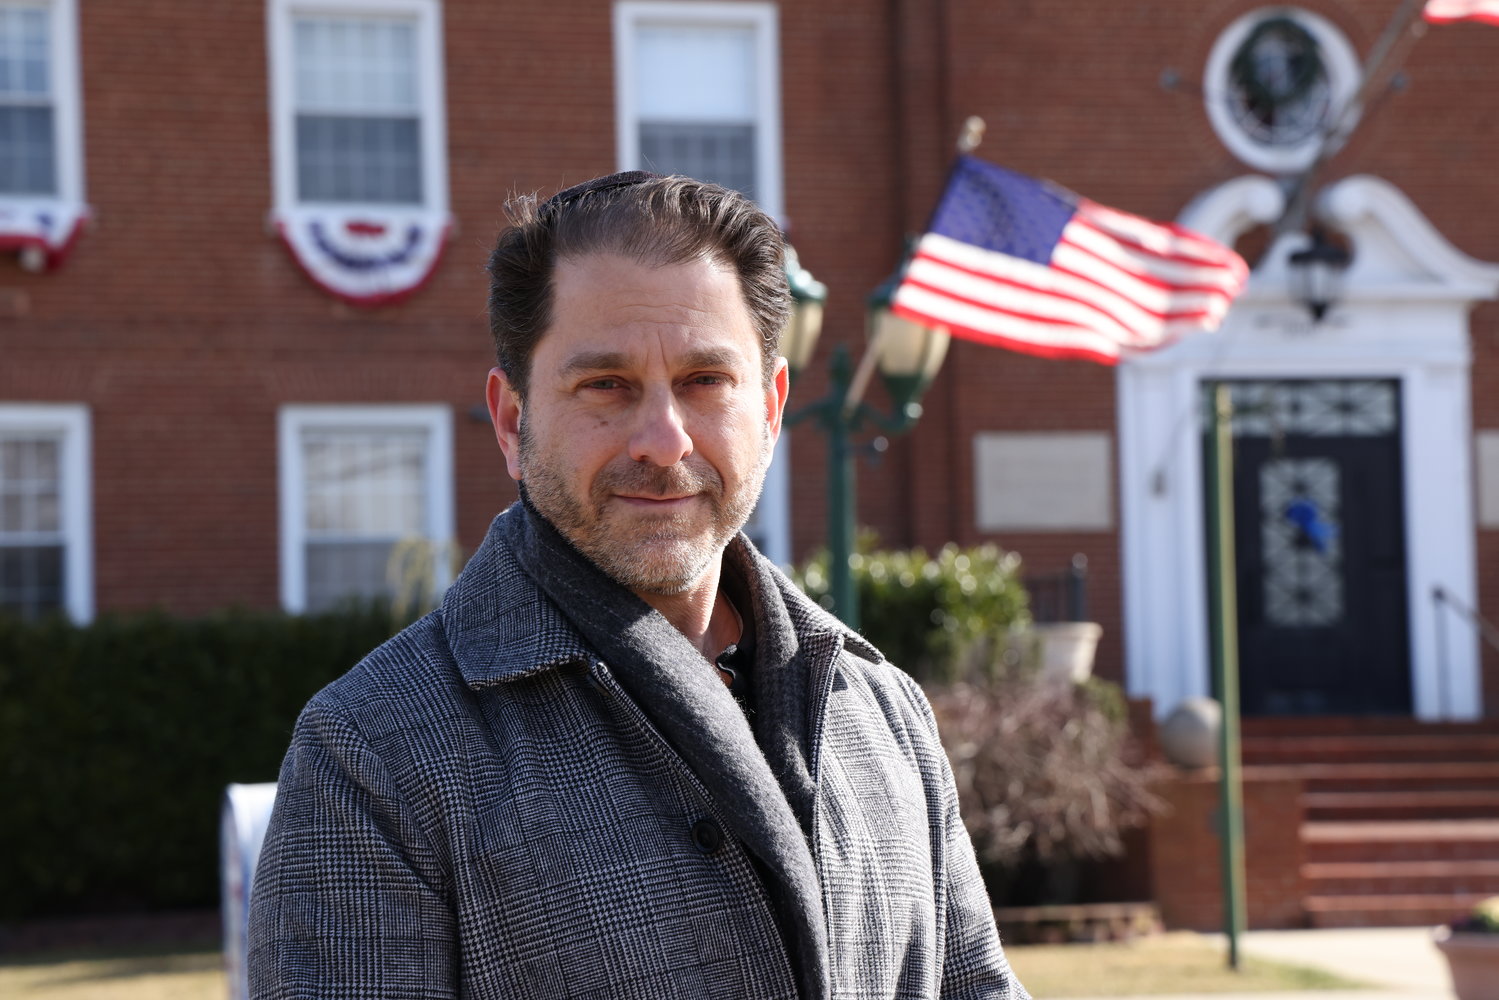 Cedarhurst Village Trustee and Deputy Mayor Ari Brown, Republican, is running for Missy Miller's vacant seat in the 20th district assembly.